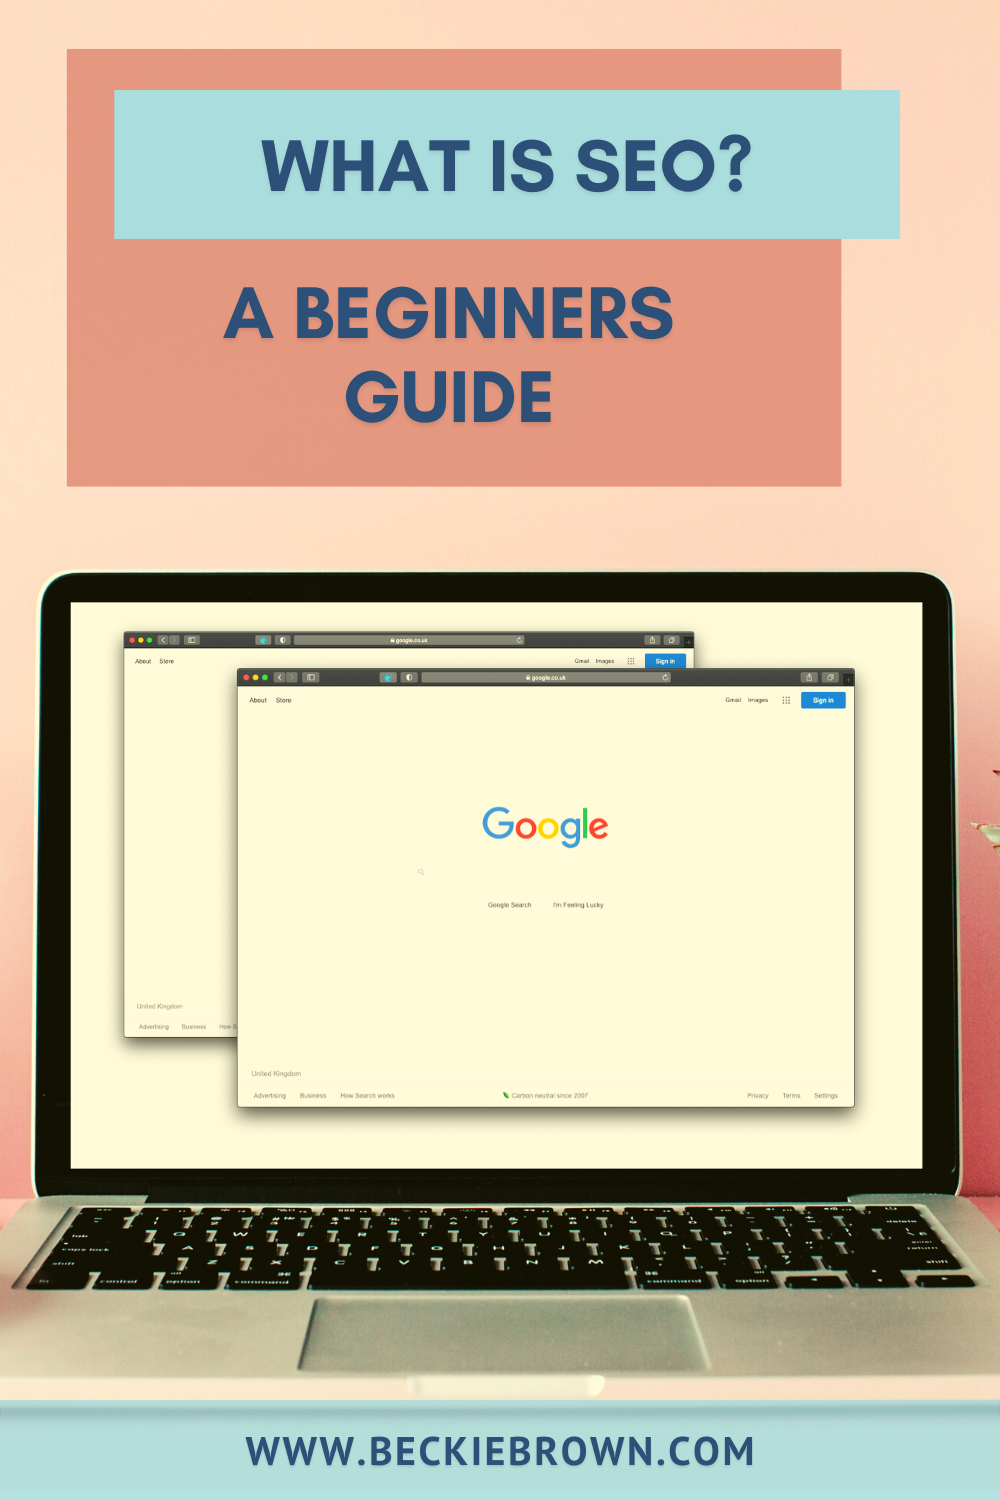 What is SEO? A Beginners Guide